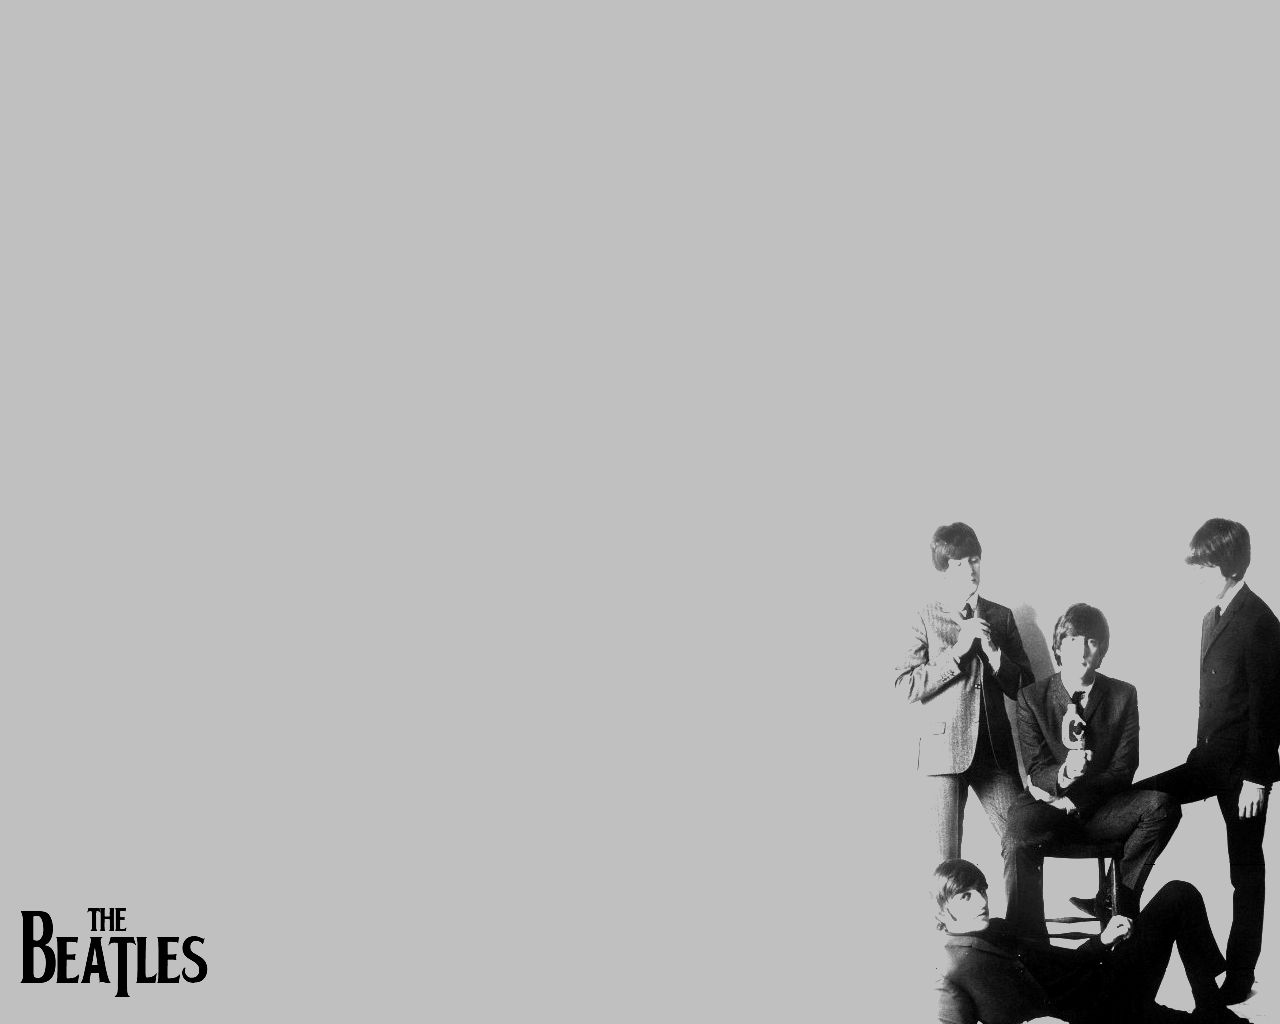 The Beatles Background For Powerpoint Music Ppt Templates